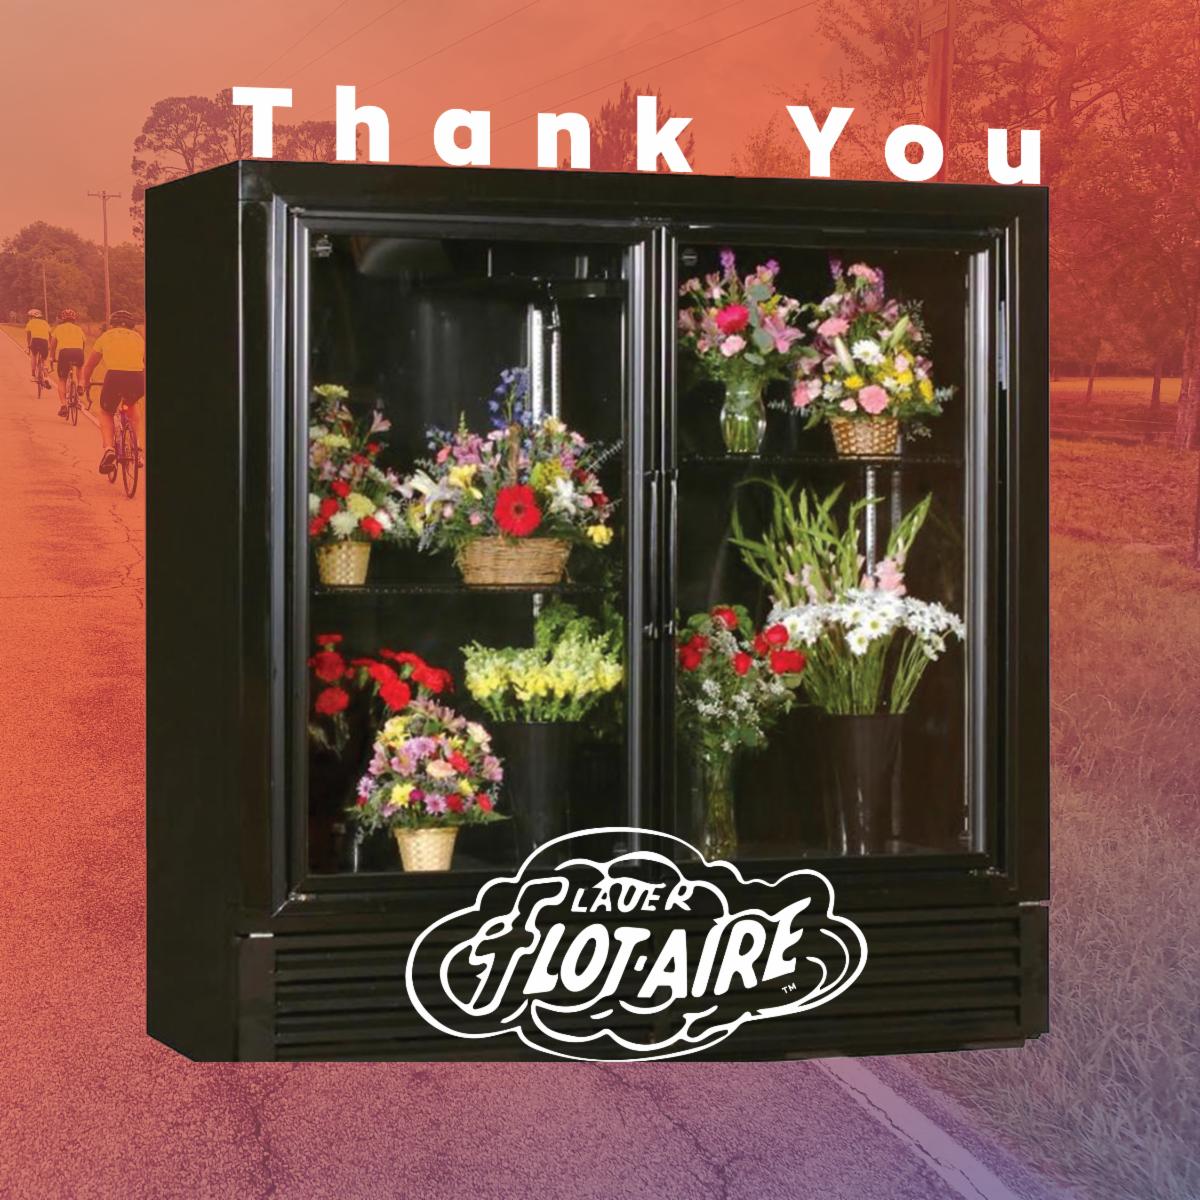 PAYH is always excited when a new sponsor comes in and joins the PAYH family. Flot-Aire flower storage coolers... Read more: conta.cc/42pLgOh #boyshome #vidalia #georgia #vidaliaga #youthhome #family #boyslife #youngmen #bikeride #payhbikeride #flotaire #flowercoolers